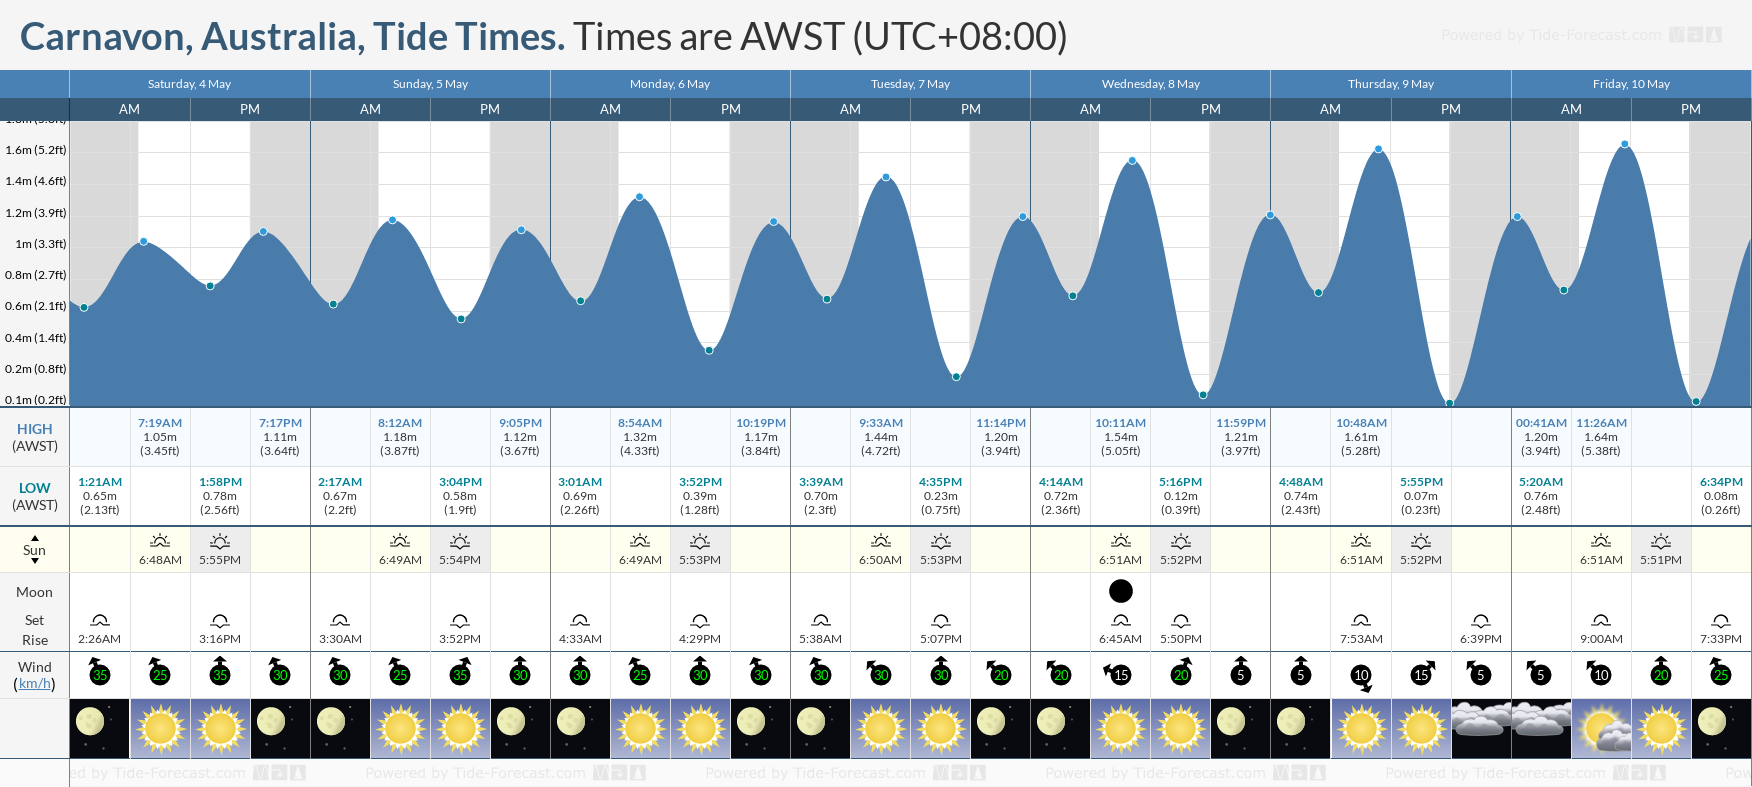 Carnavon, Australia Tide Chart including high and low tide tide times for the next 7 days